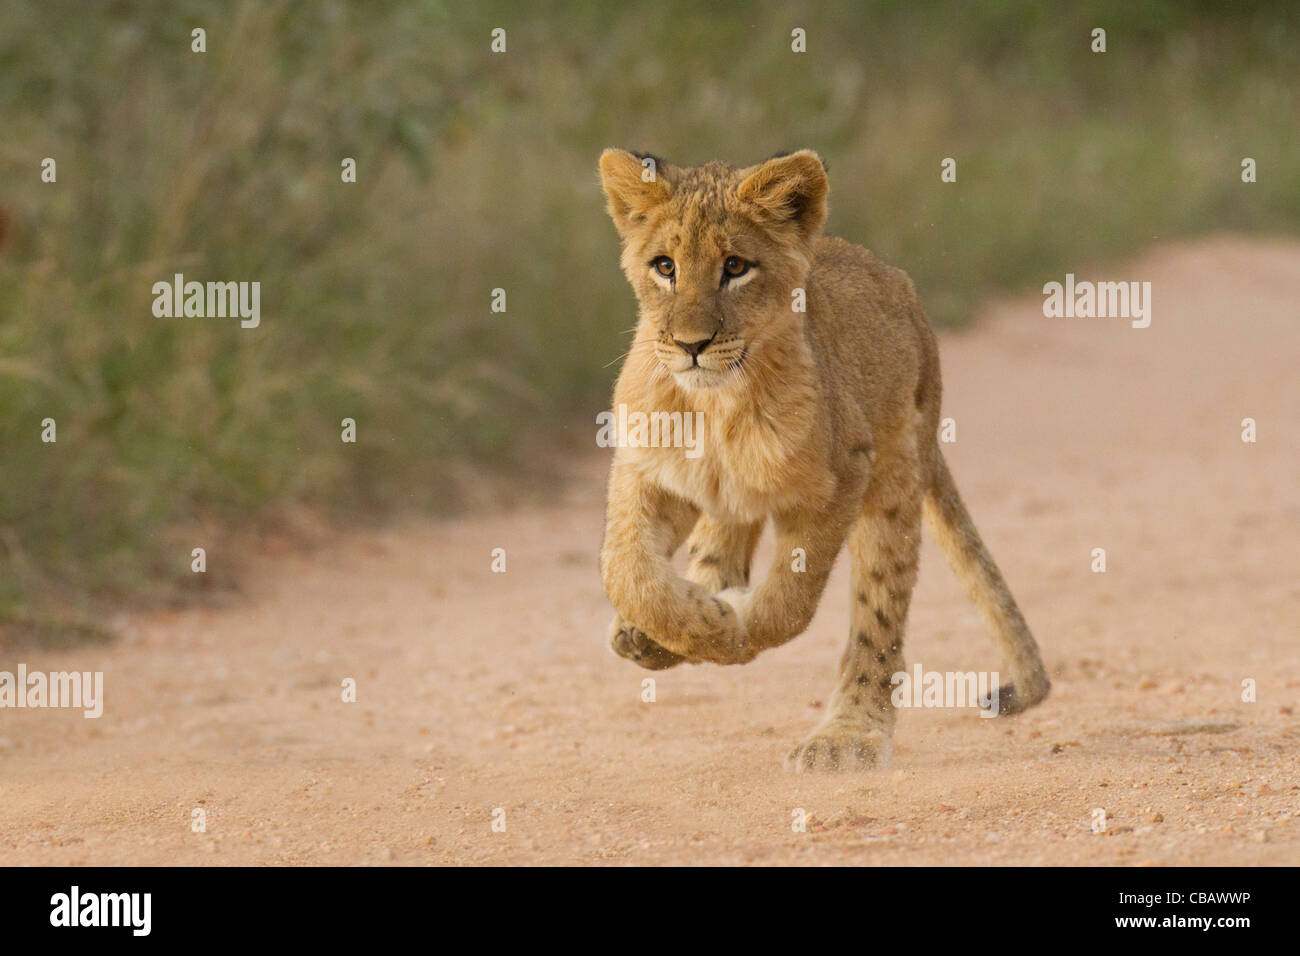 Baby Lion in esecuzione (Panthera leo) Foto Stock